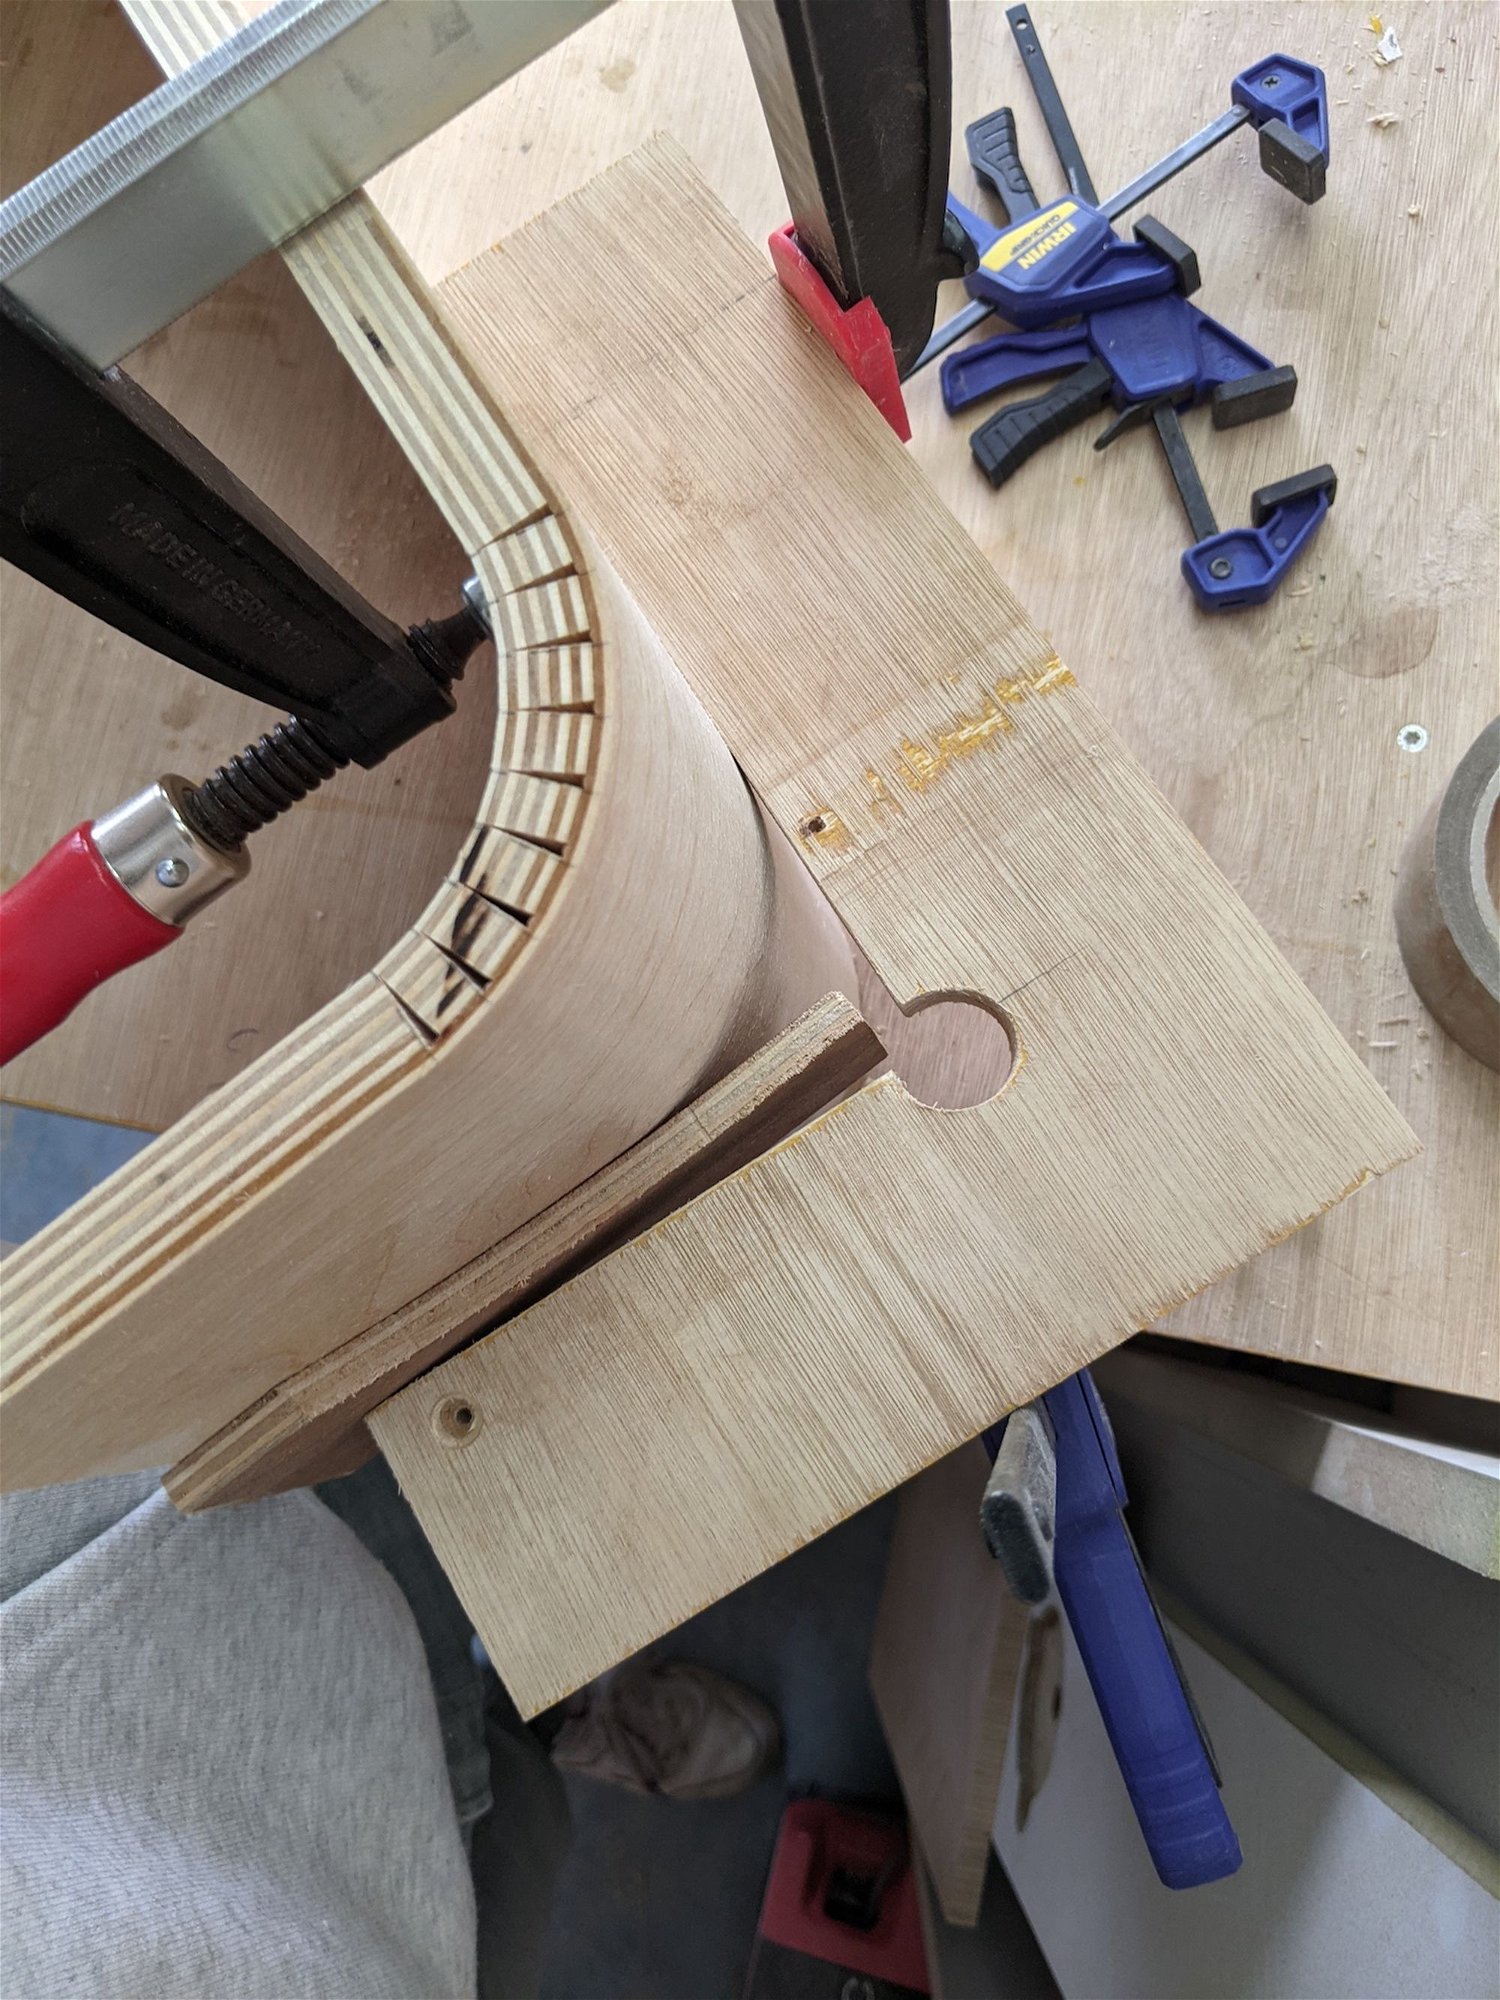 I made some simple jigs to clamp the wood. It's not exactly 90 degrees; that was intended.